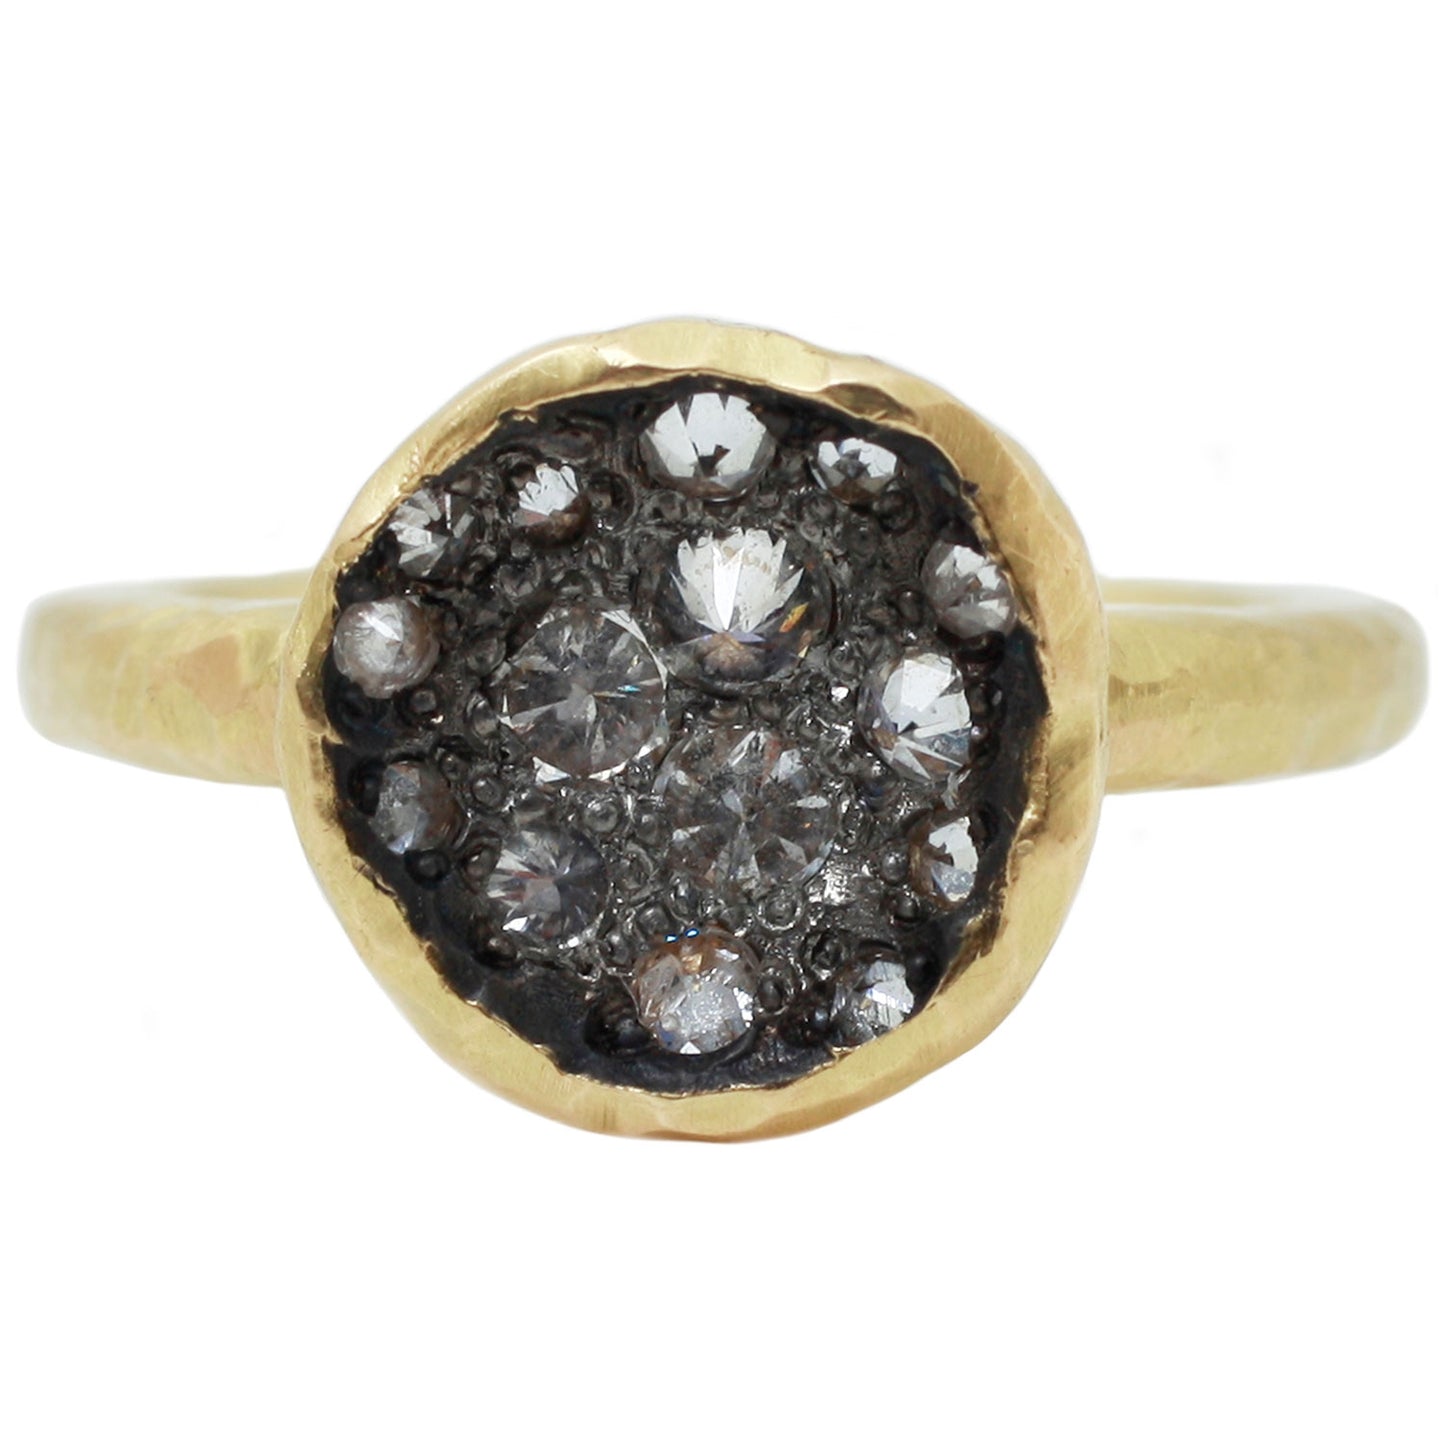 TAP by Todd Pownell Diamond Crater Ring